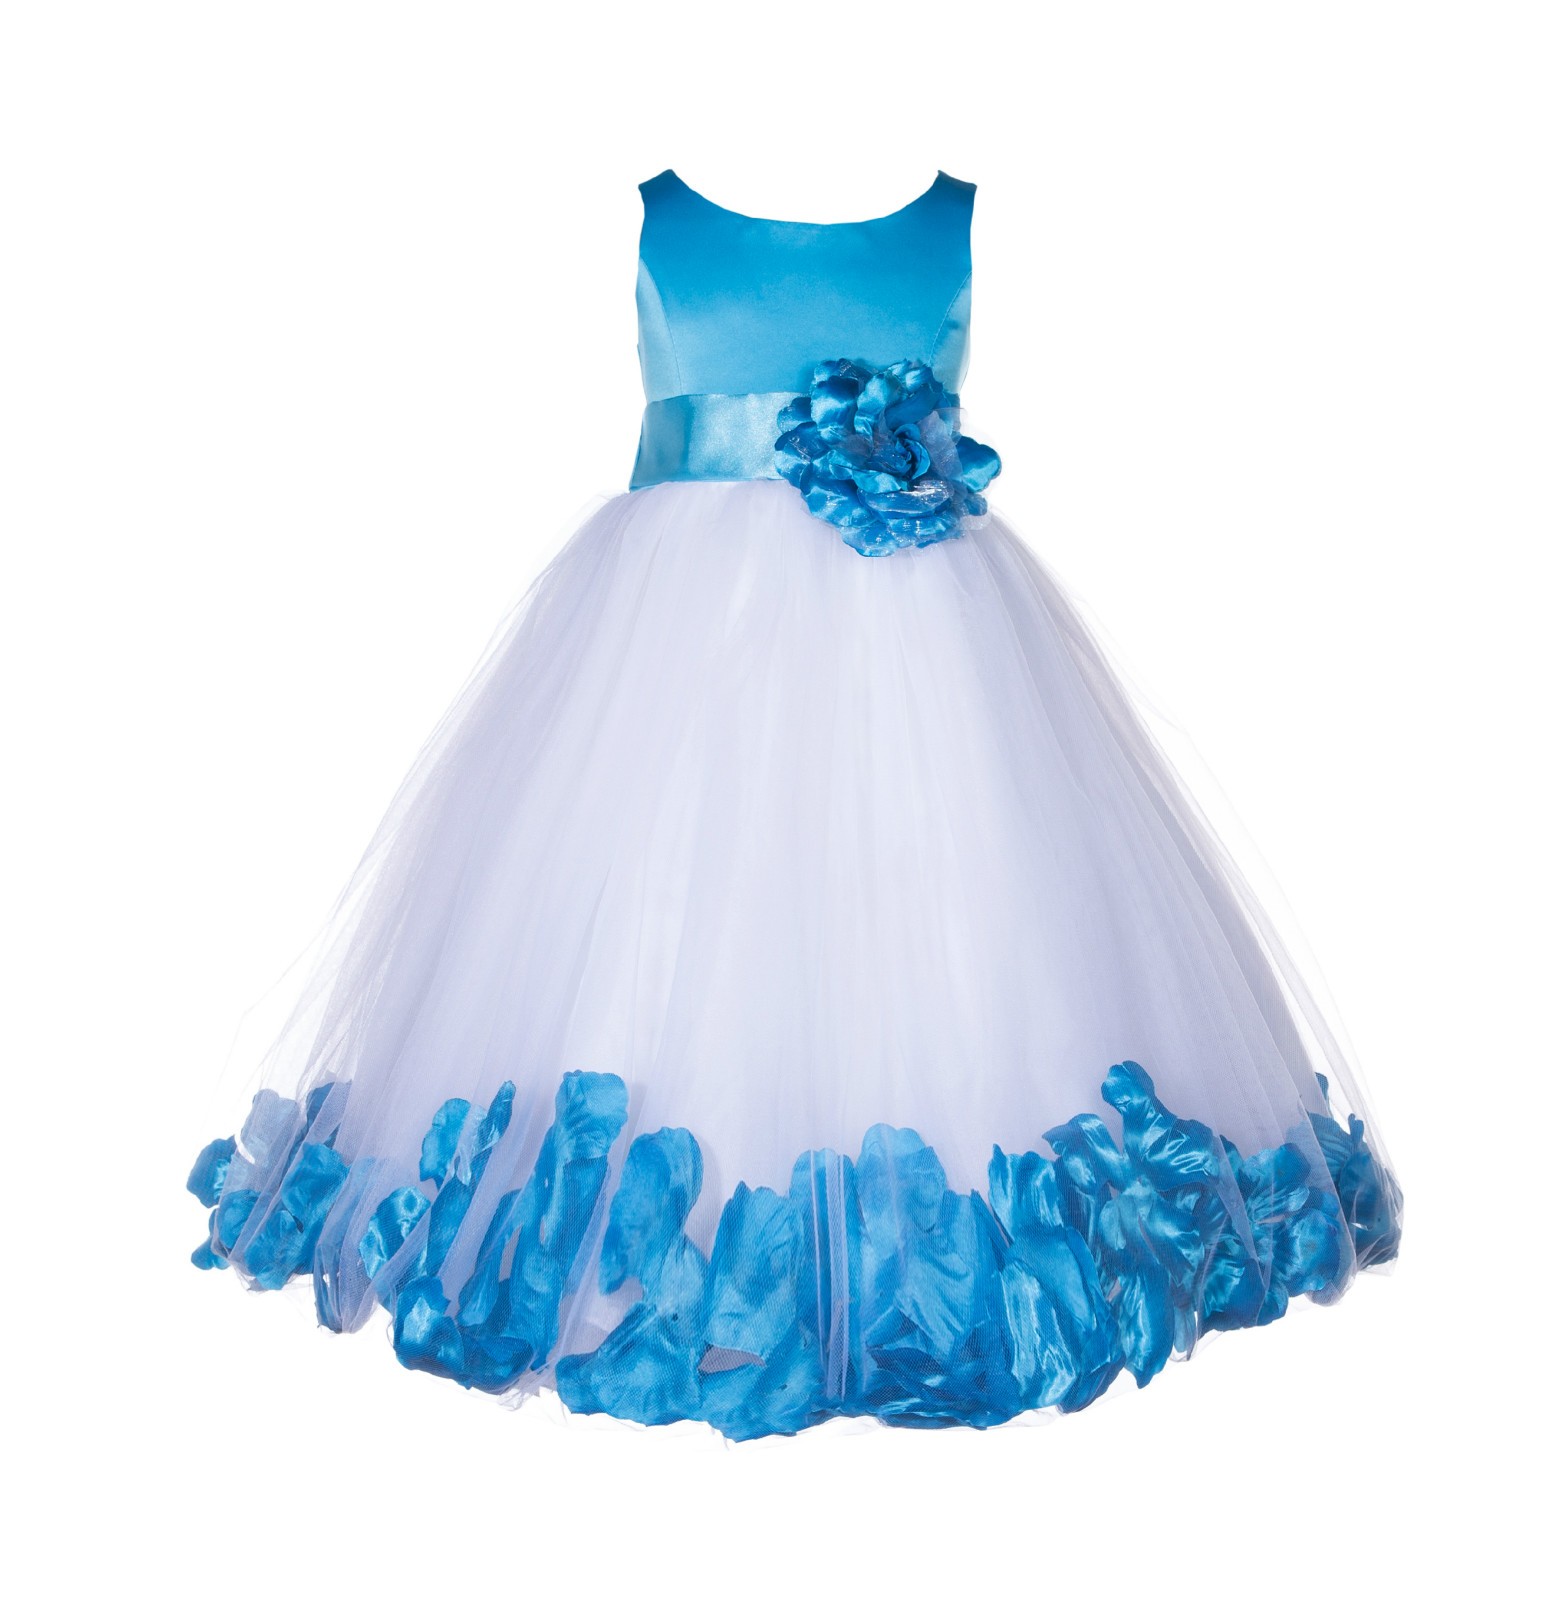 Turquoise Floral Rose Petals Tulle Flower Girl Dress 167S